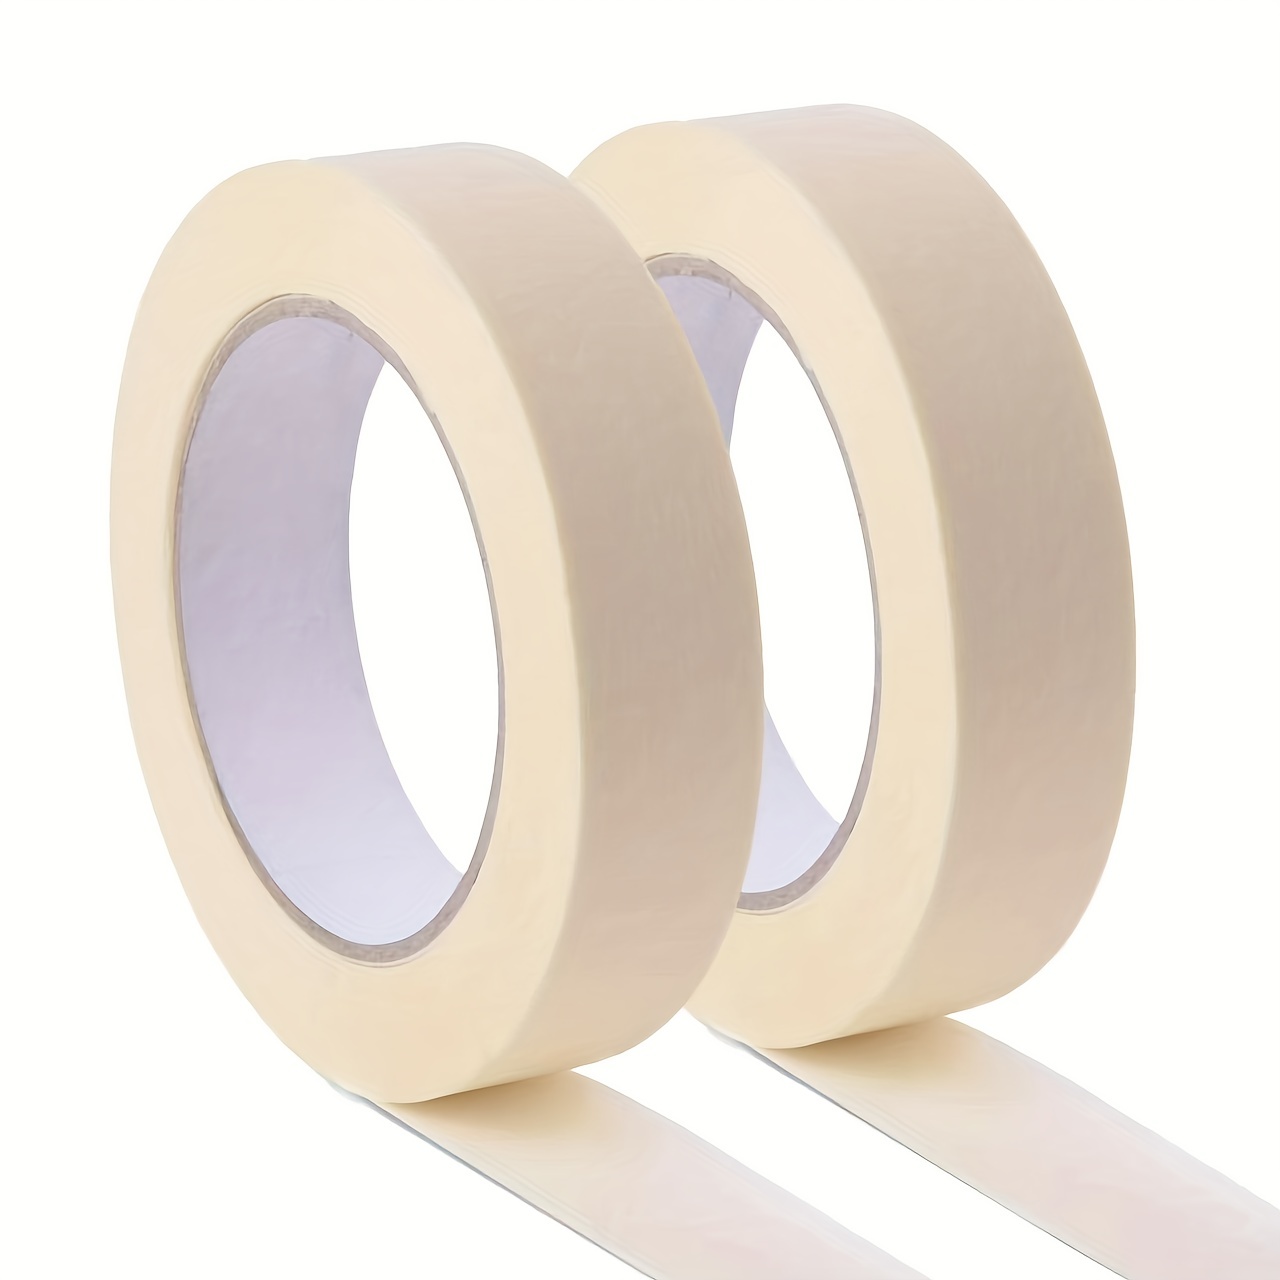 2 inch White Paper Tape (2 inch x 60 Yards)